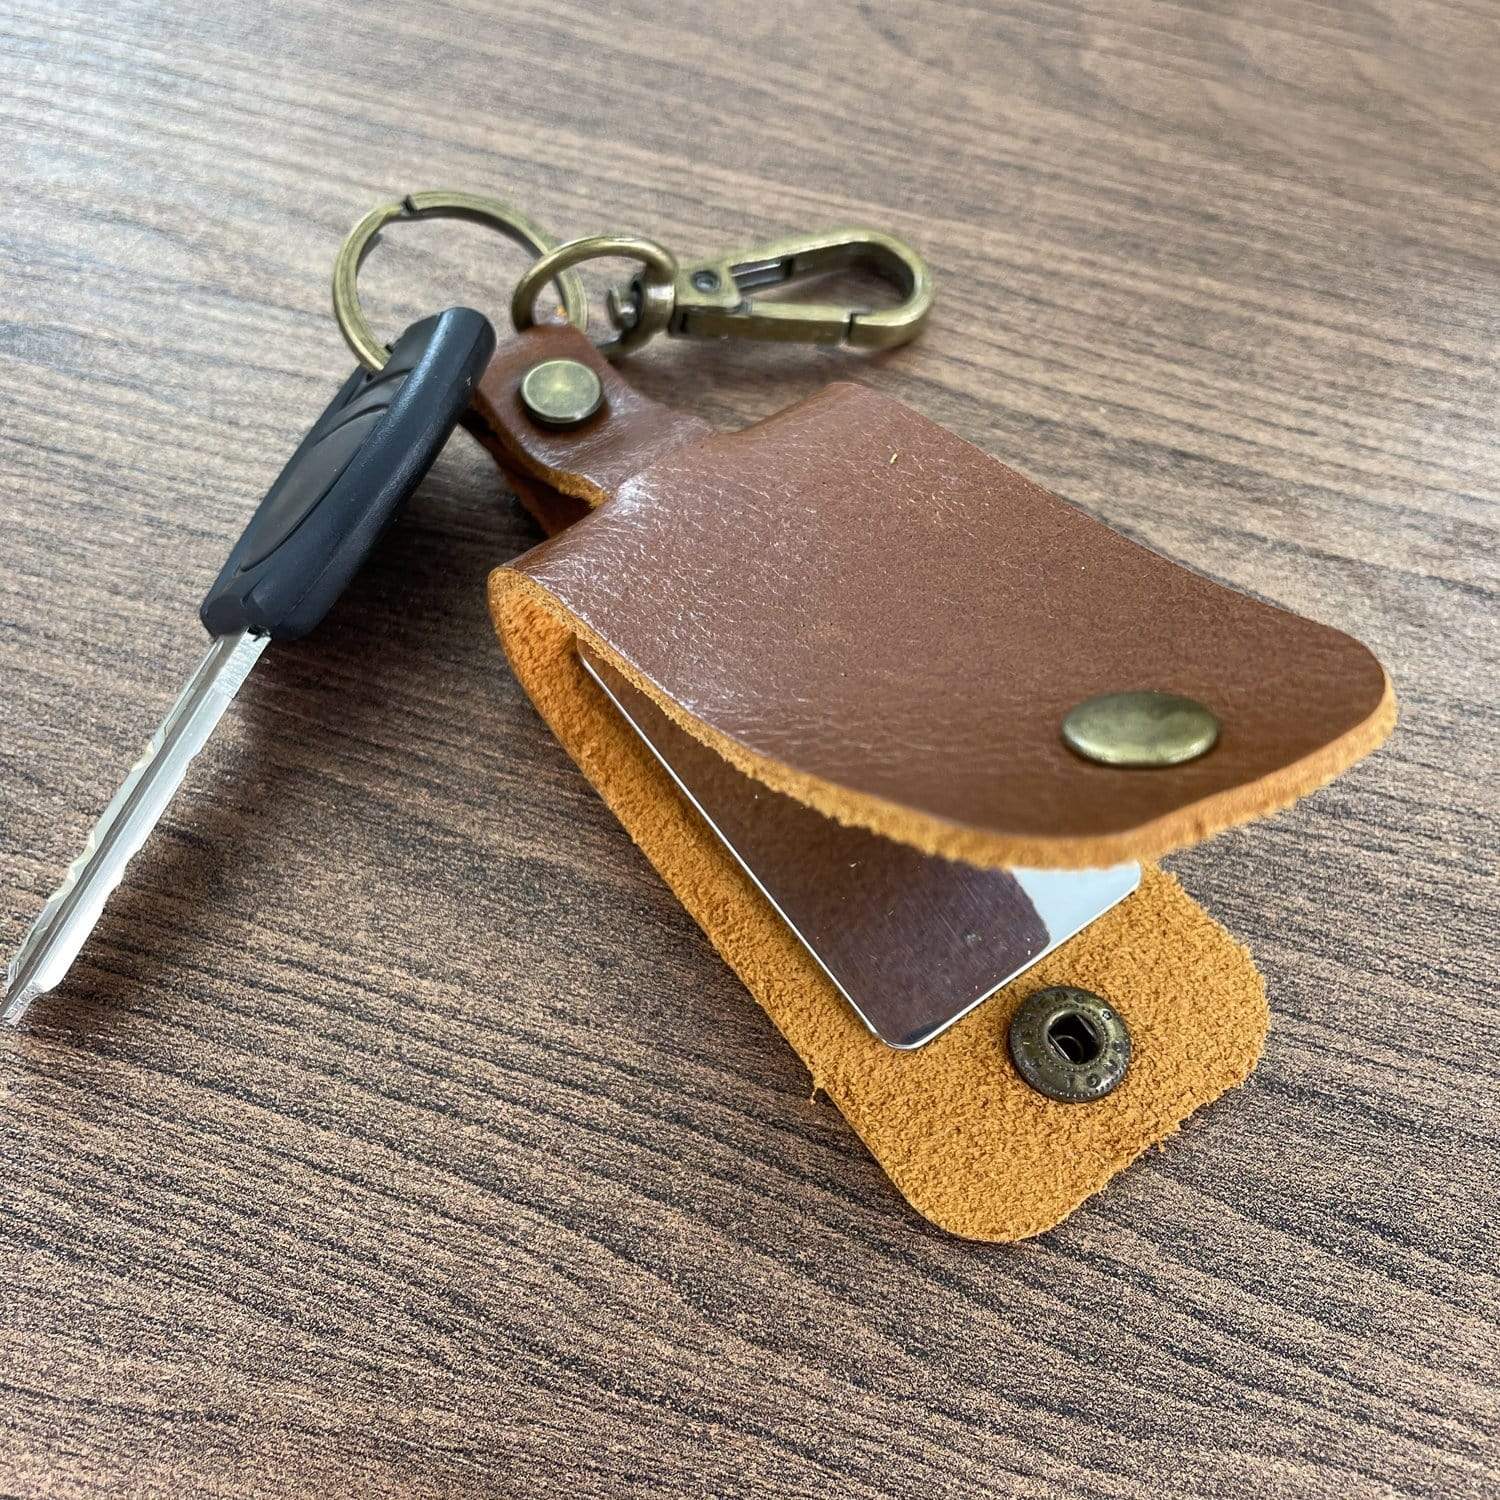 Keychains To Our Son - Enjoy The Ride Leather Customized Keychain GiveMe-Gifts